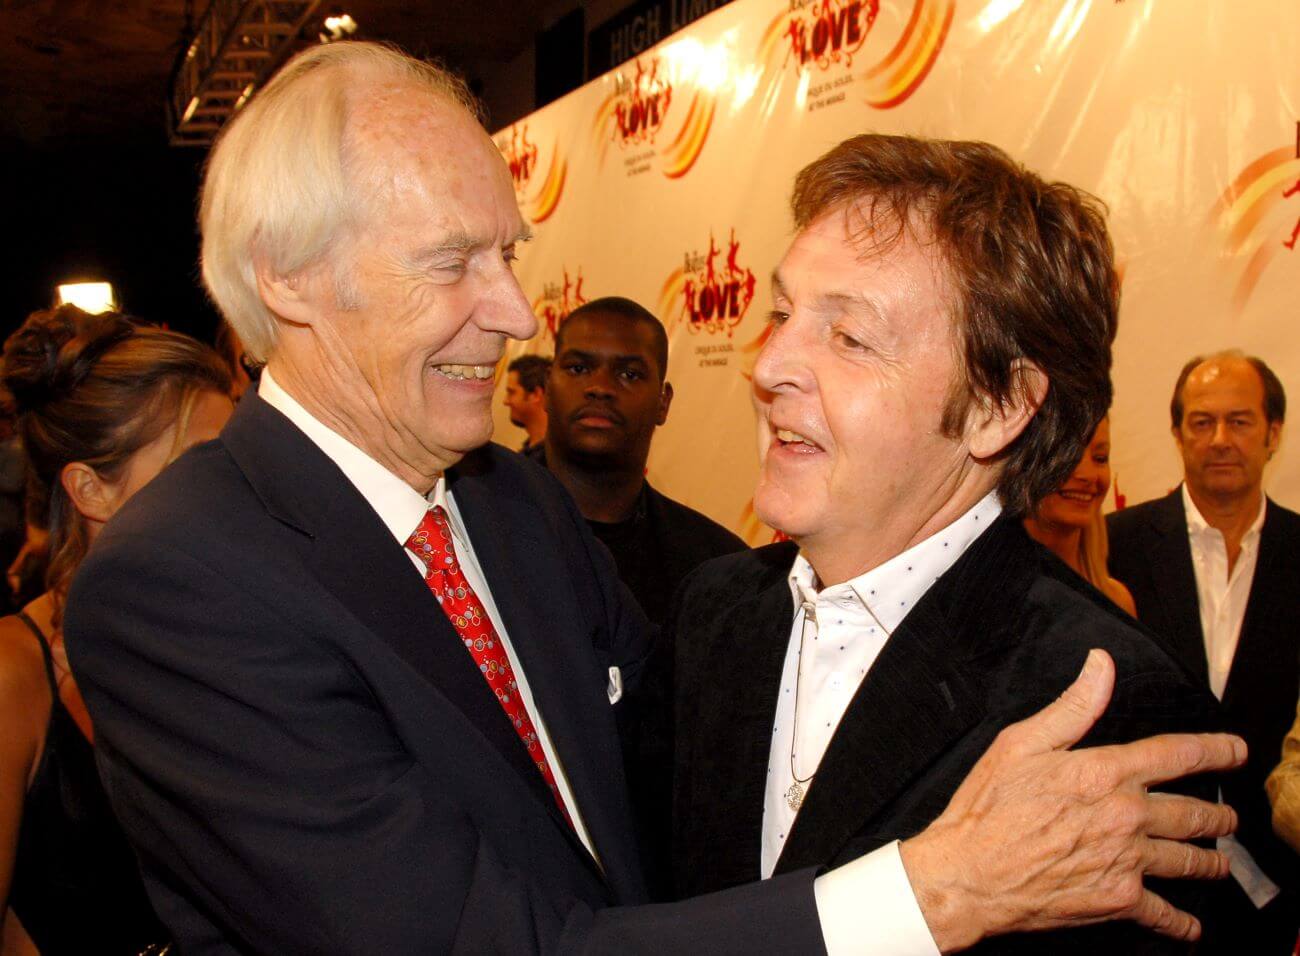 George Martin and Paul McCartney embrace on a red carpet.